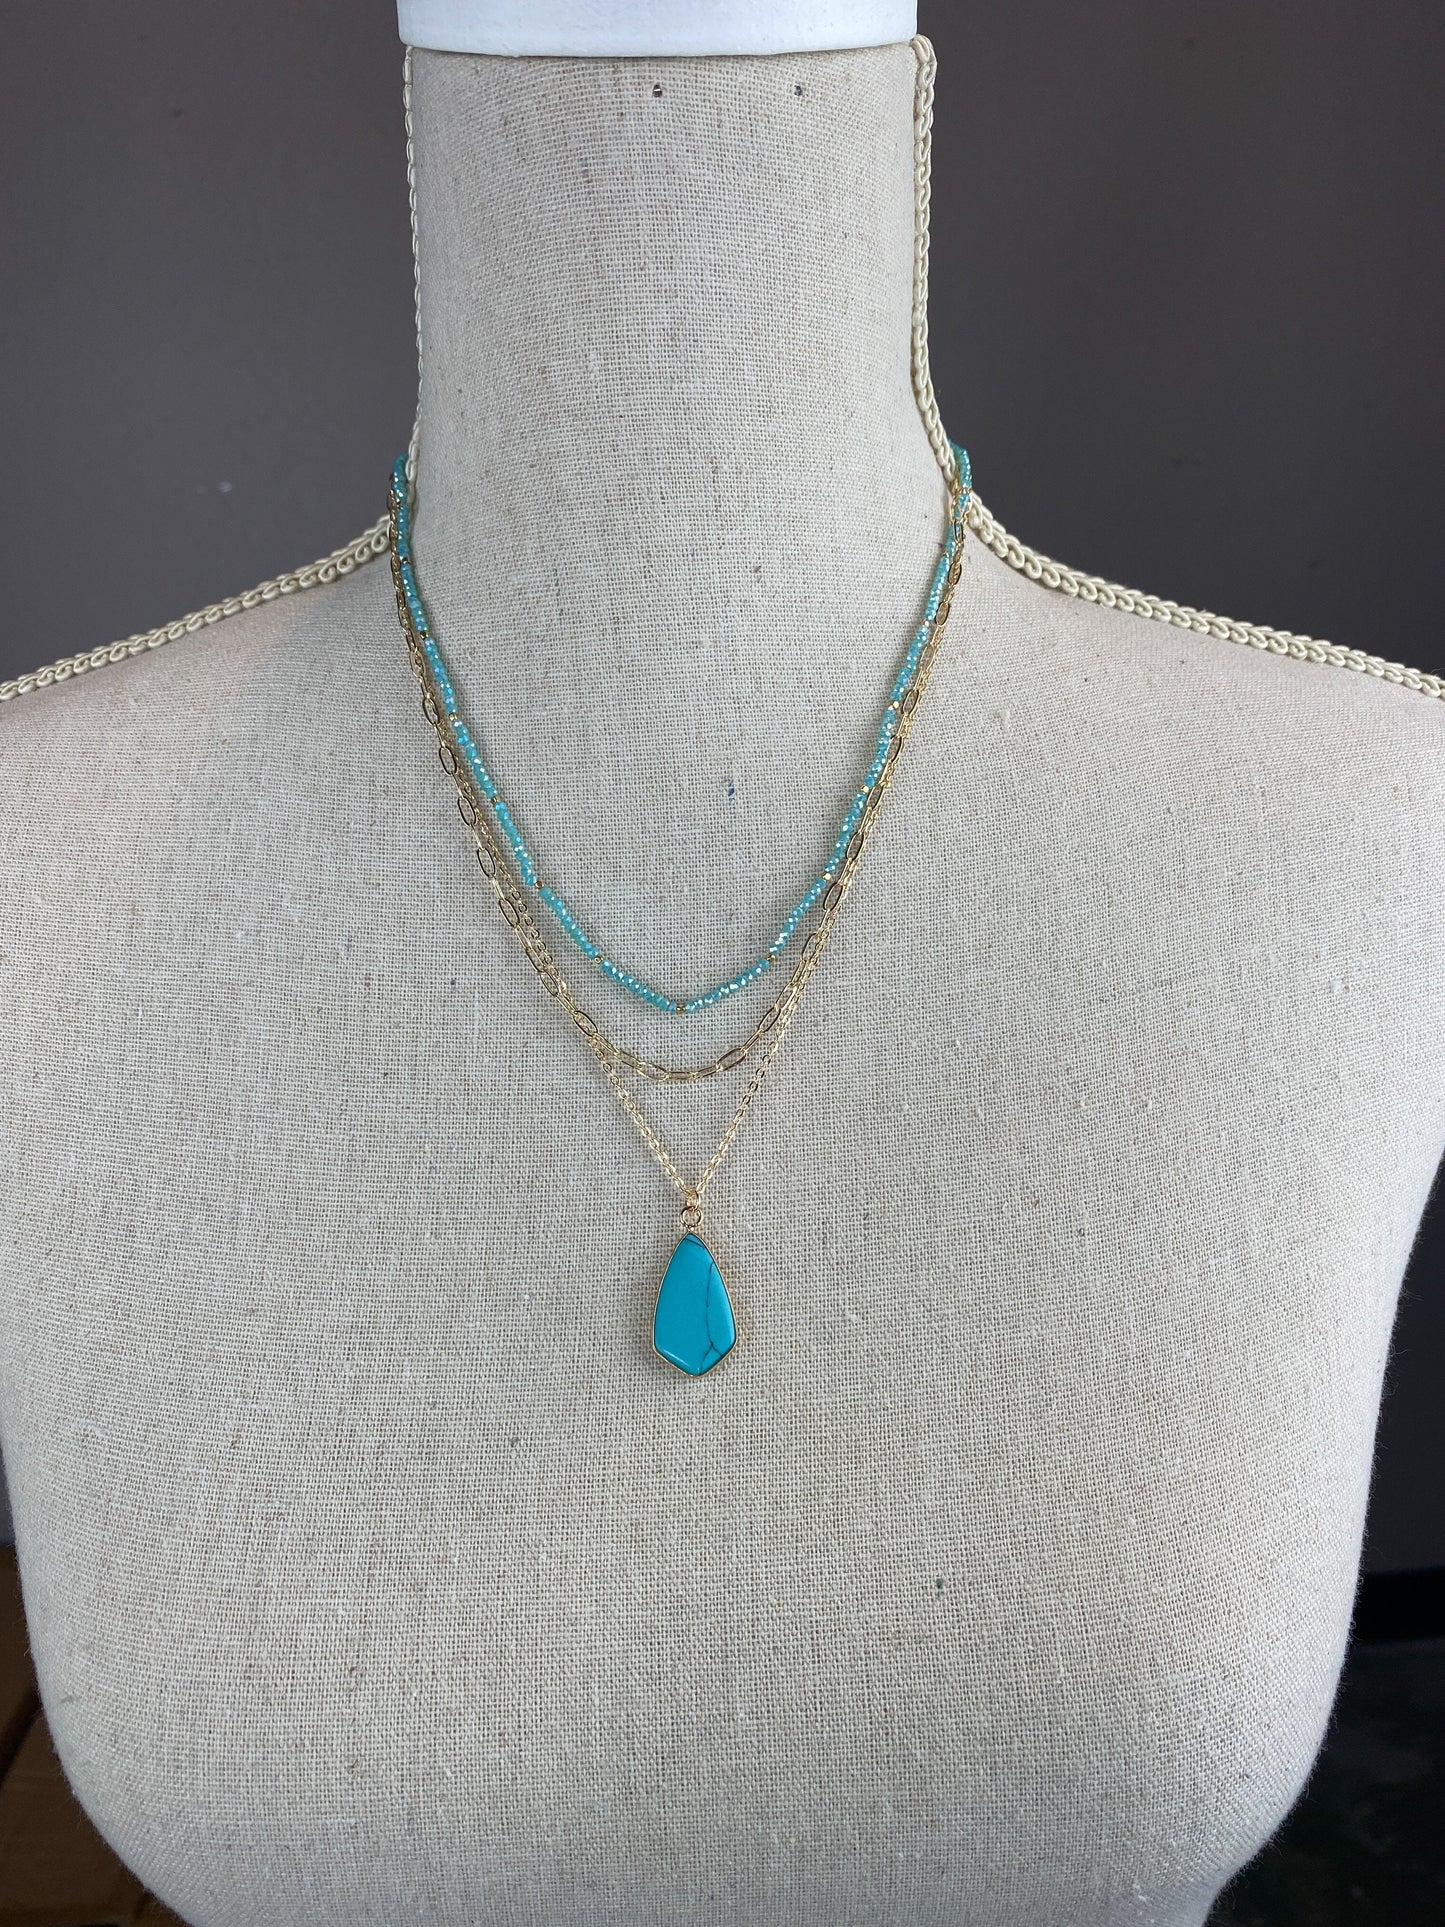 Terela Necklace - Turquoise